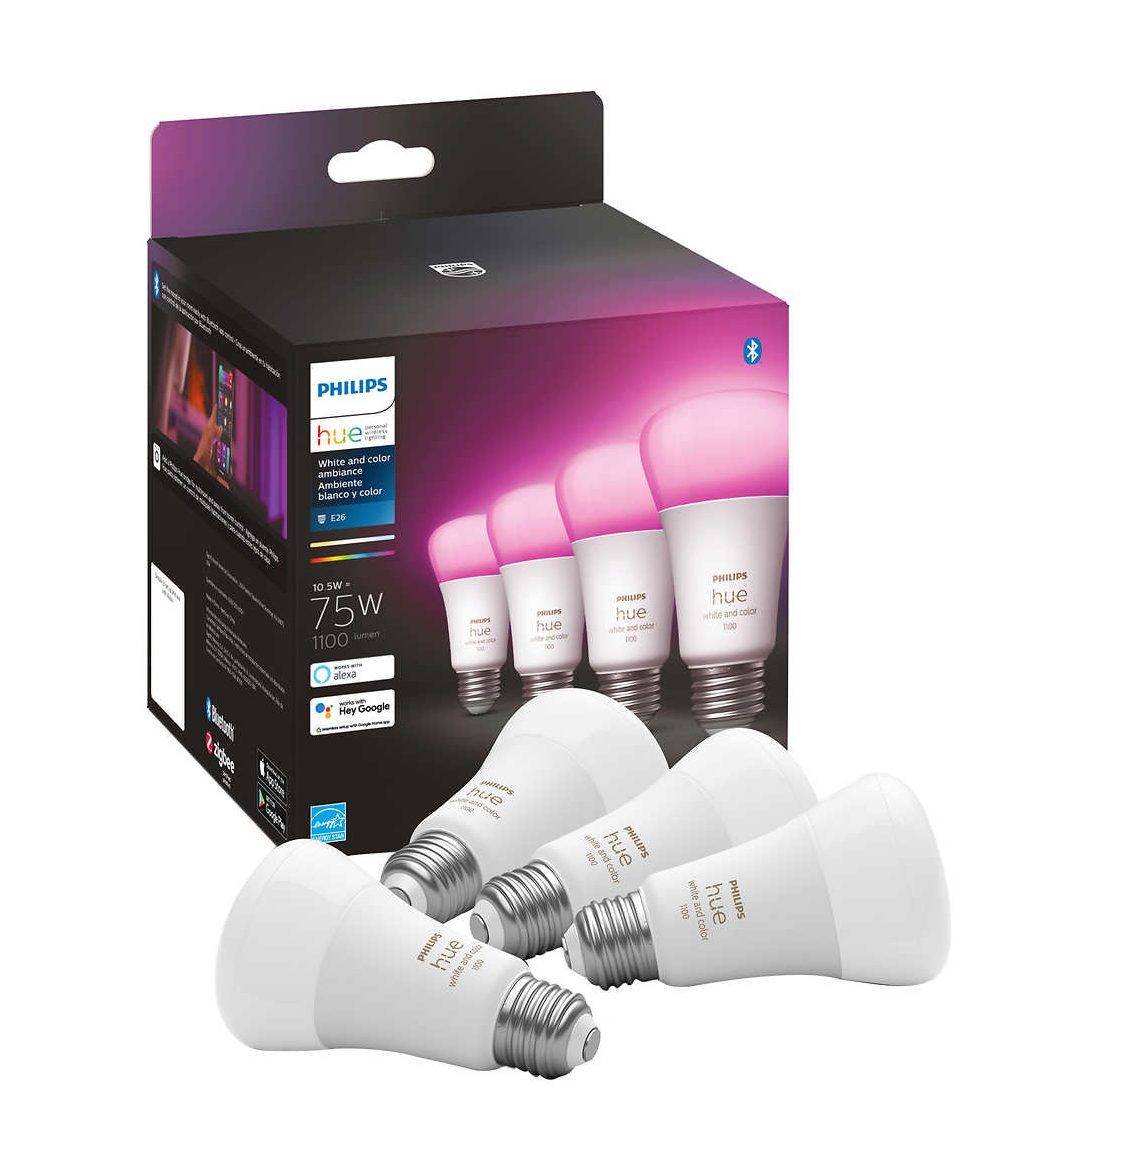 Philips Hue 75W White & Color Ambiance A19 4pk